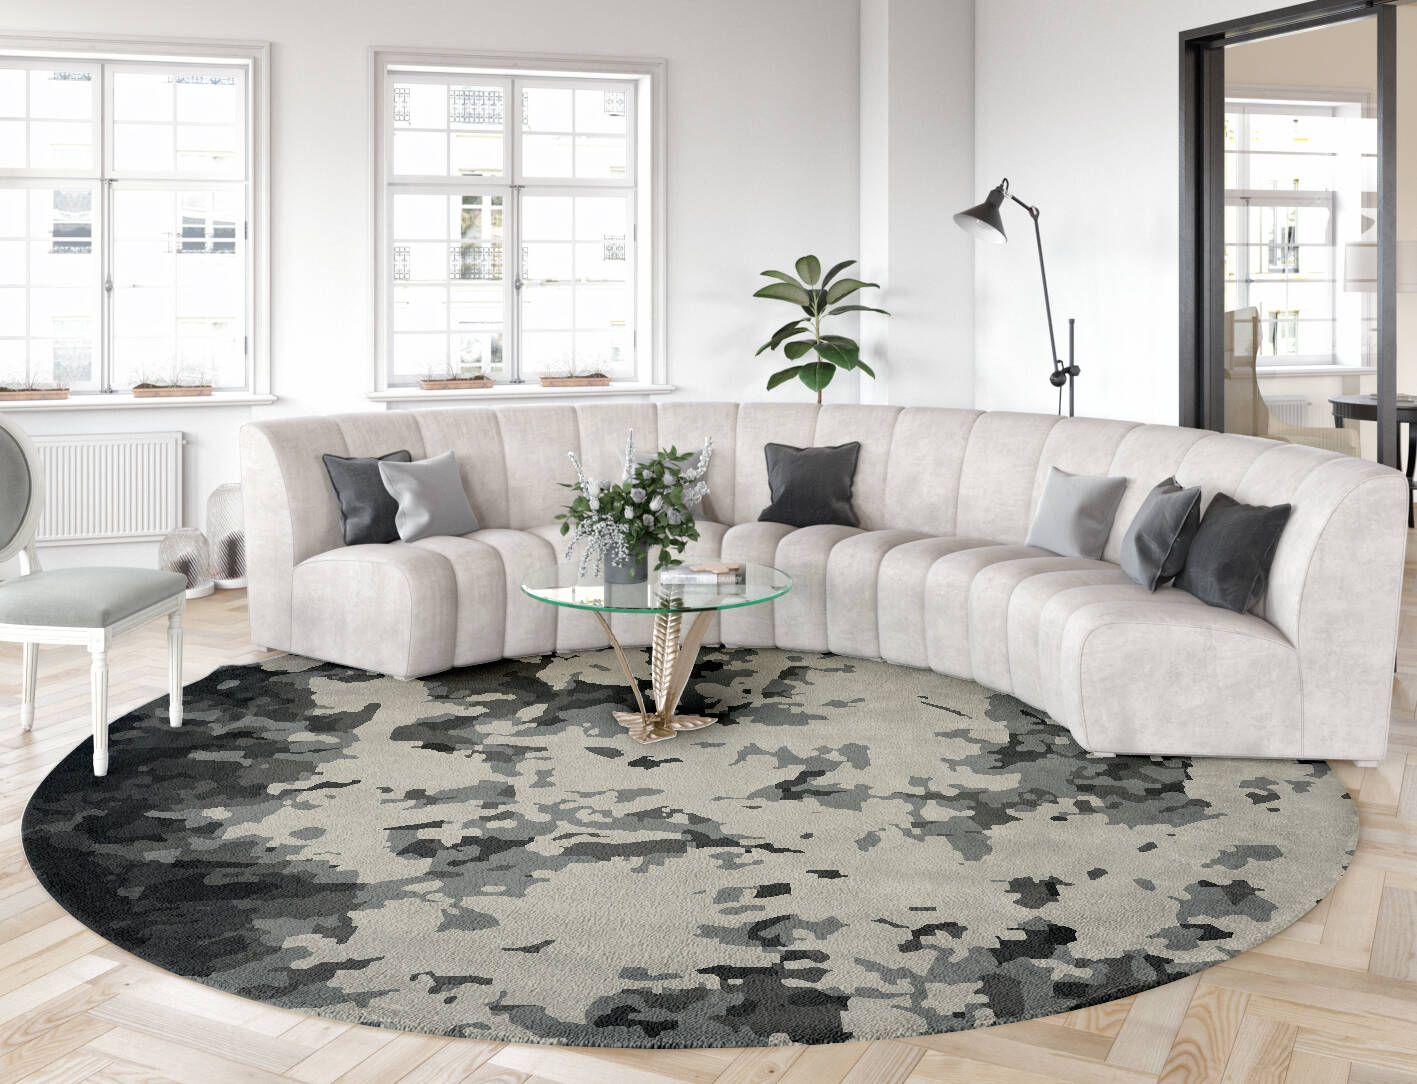 Roswell Grays Surface Art Round Hand Tufted Pure Wool Custom Rug by Rug Artisan